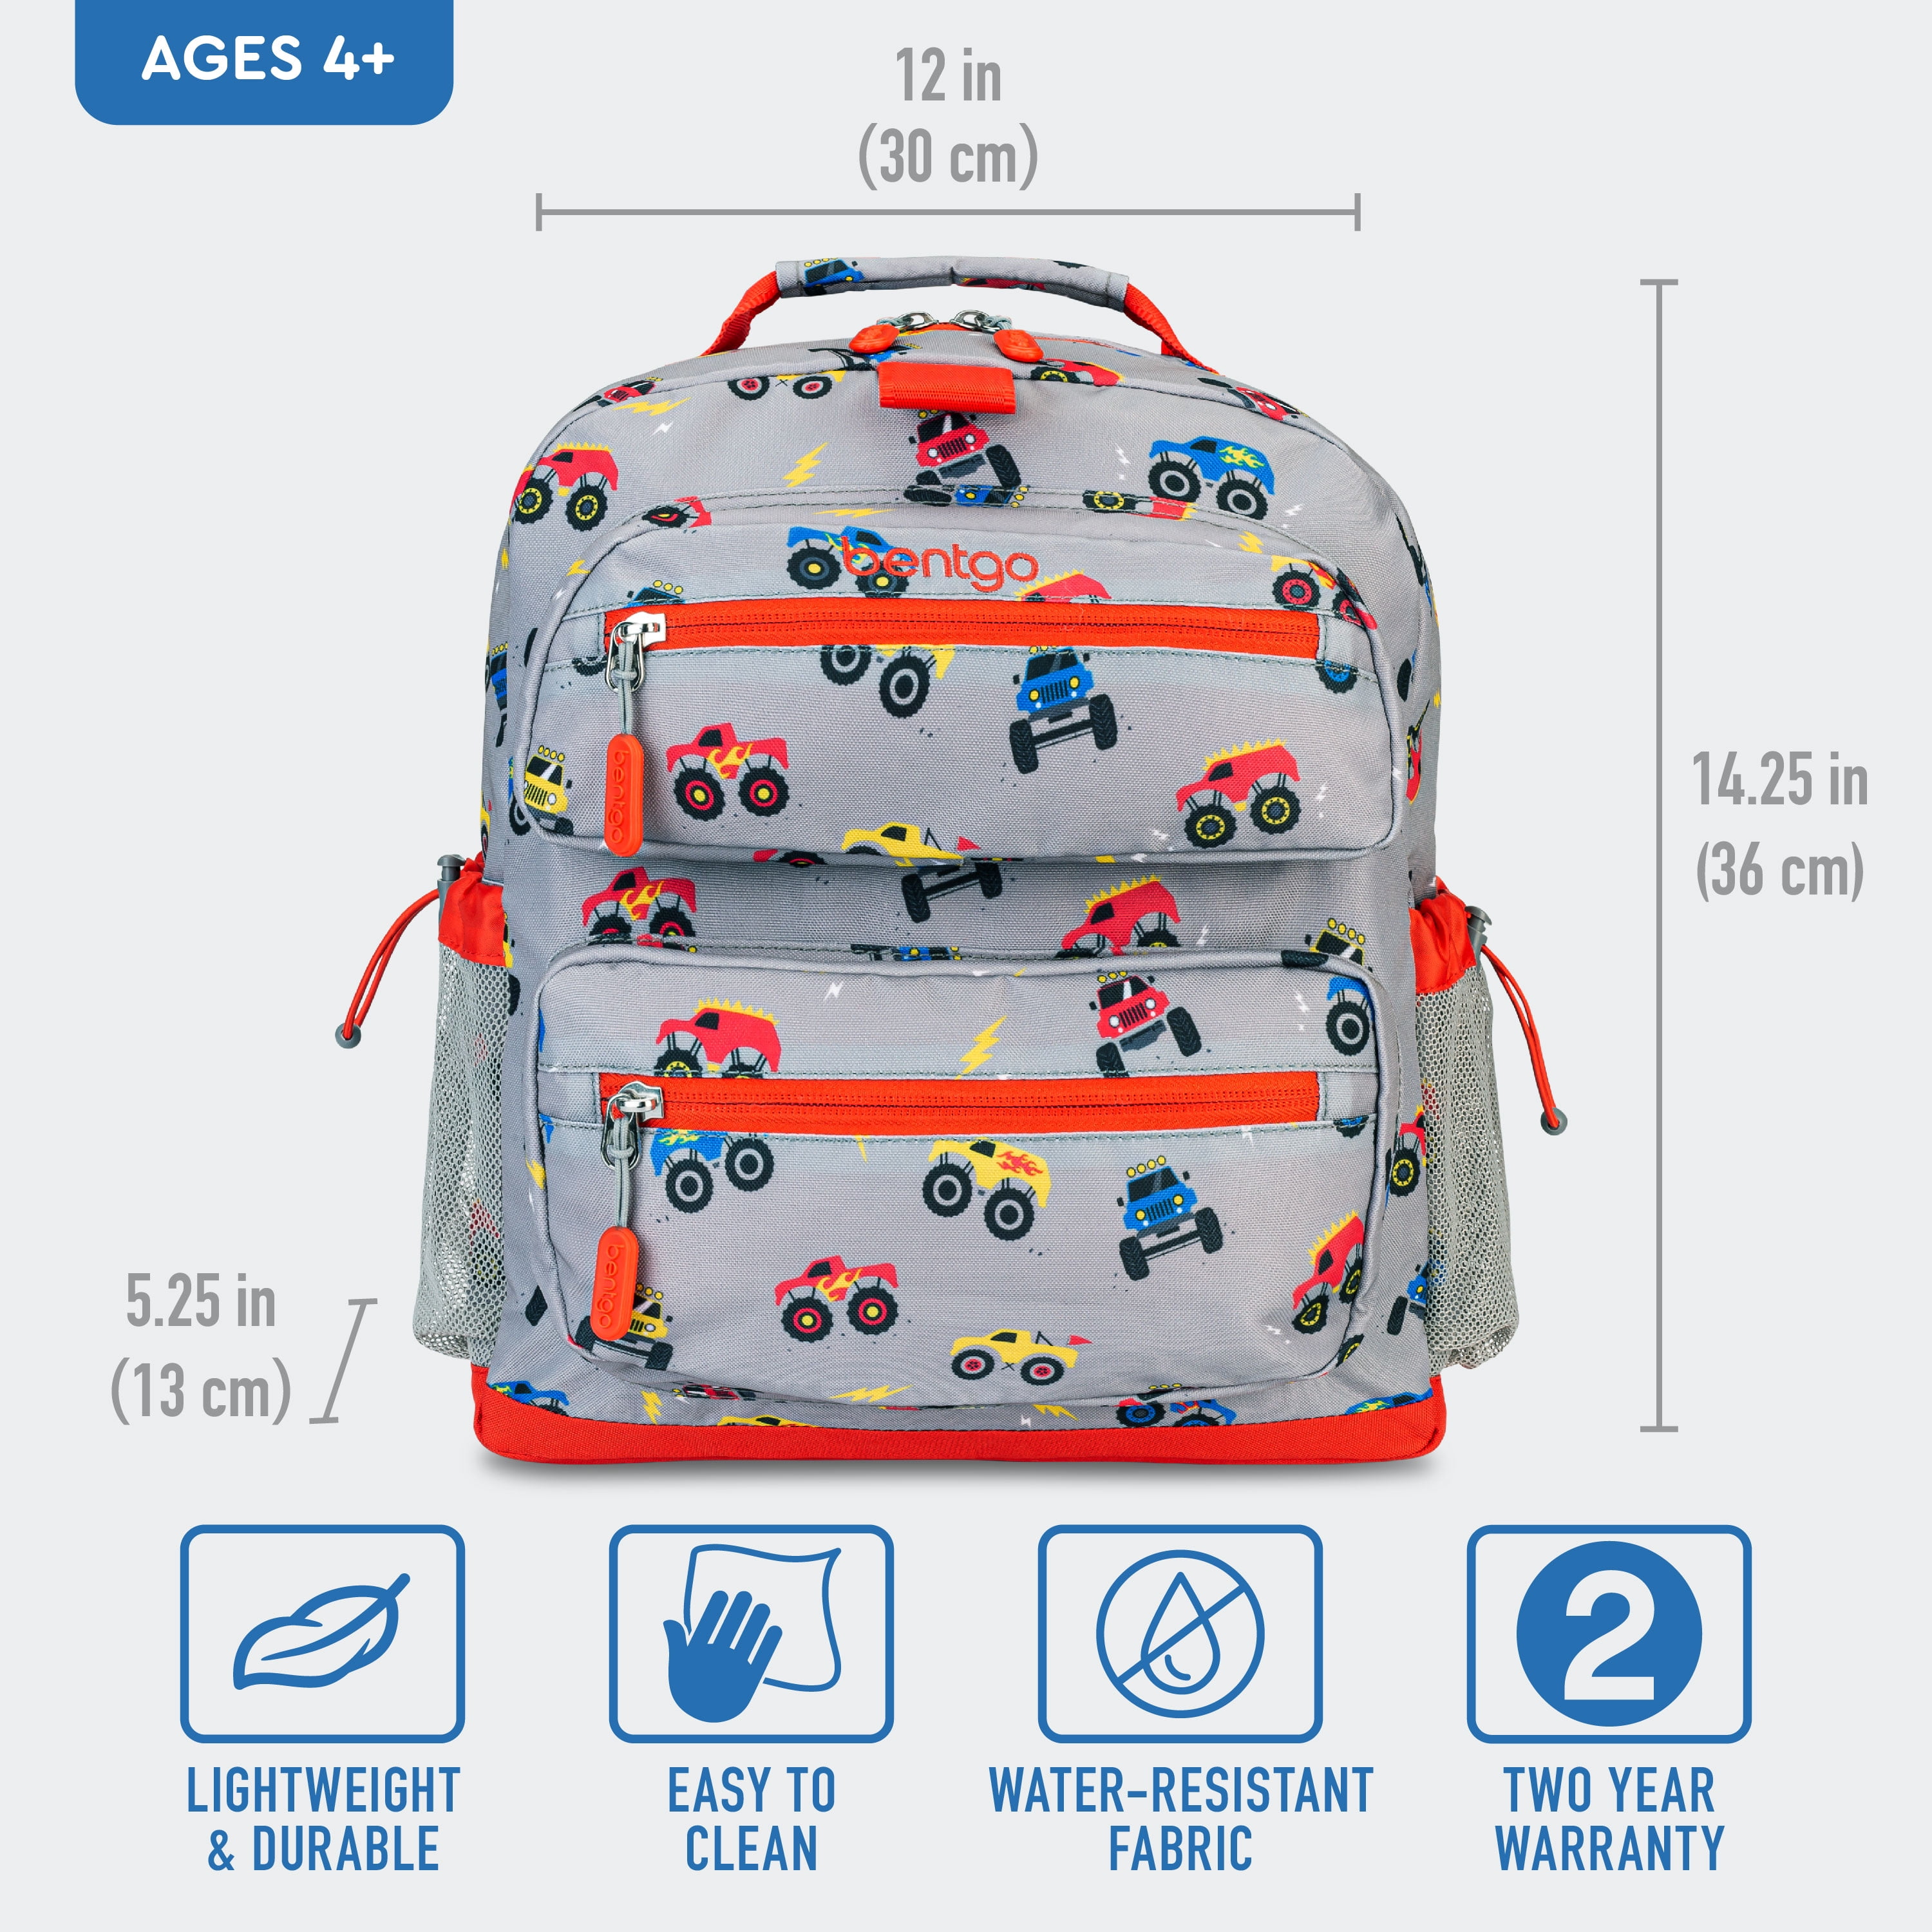 Bentgo® Kids Backpack - Lightweight 14” Backpack in Unique Prints for  School, Travel, & Daycare - Roomy Interior, Durable & Water-Resistant  Fabric, 